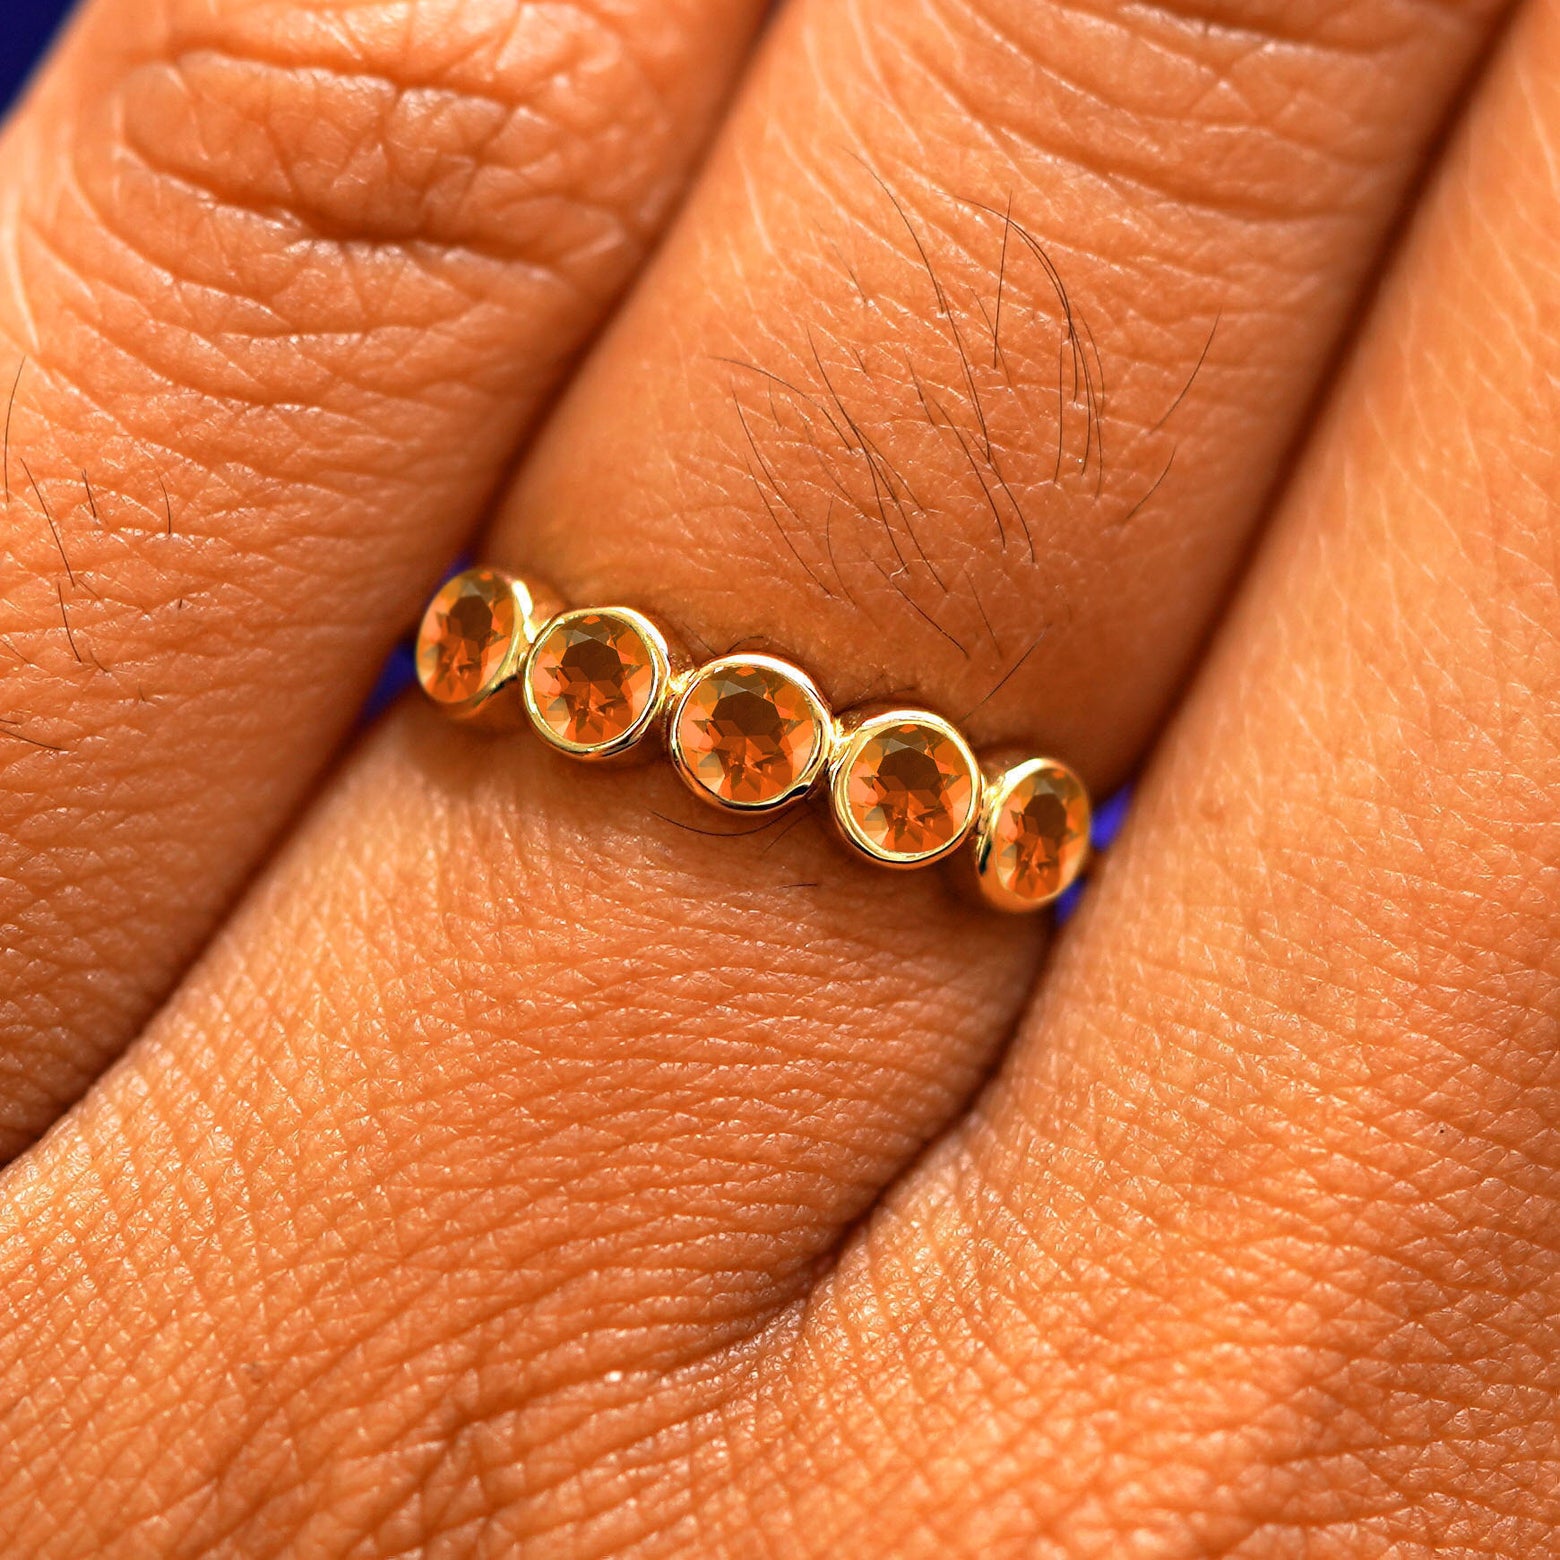 Close up view of a model's hand wearing a yellow gold 5 Gemstones Ring in fire opal